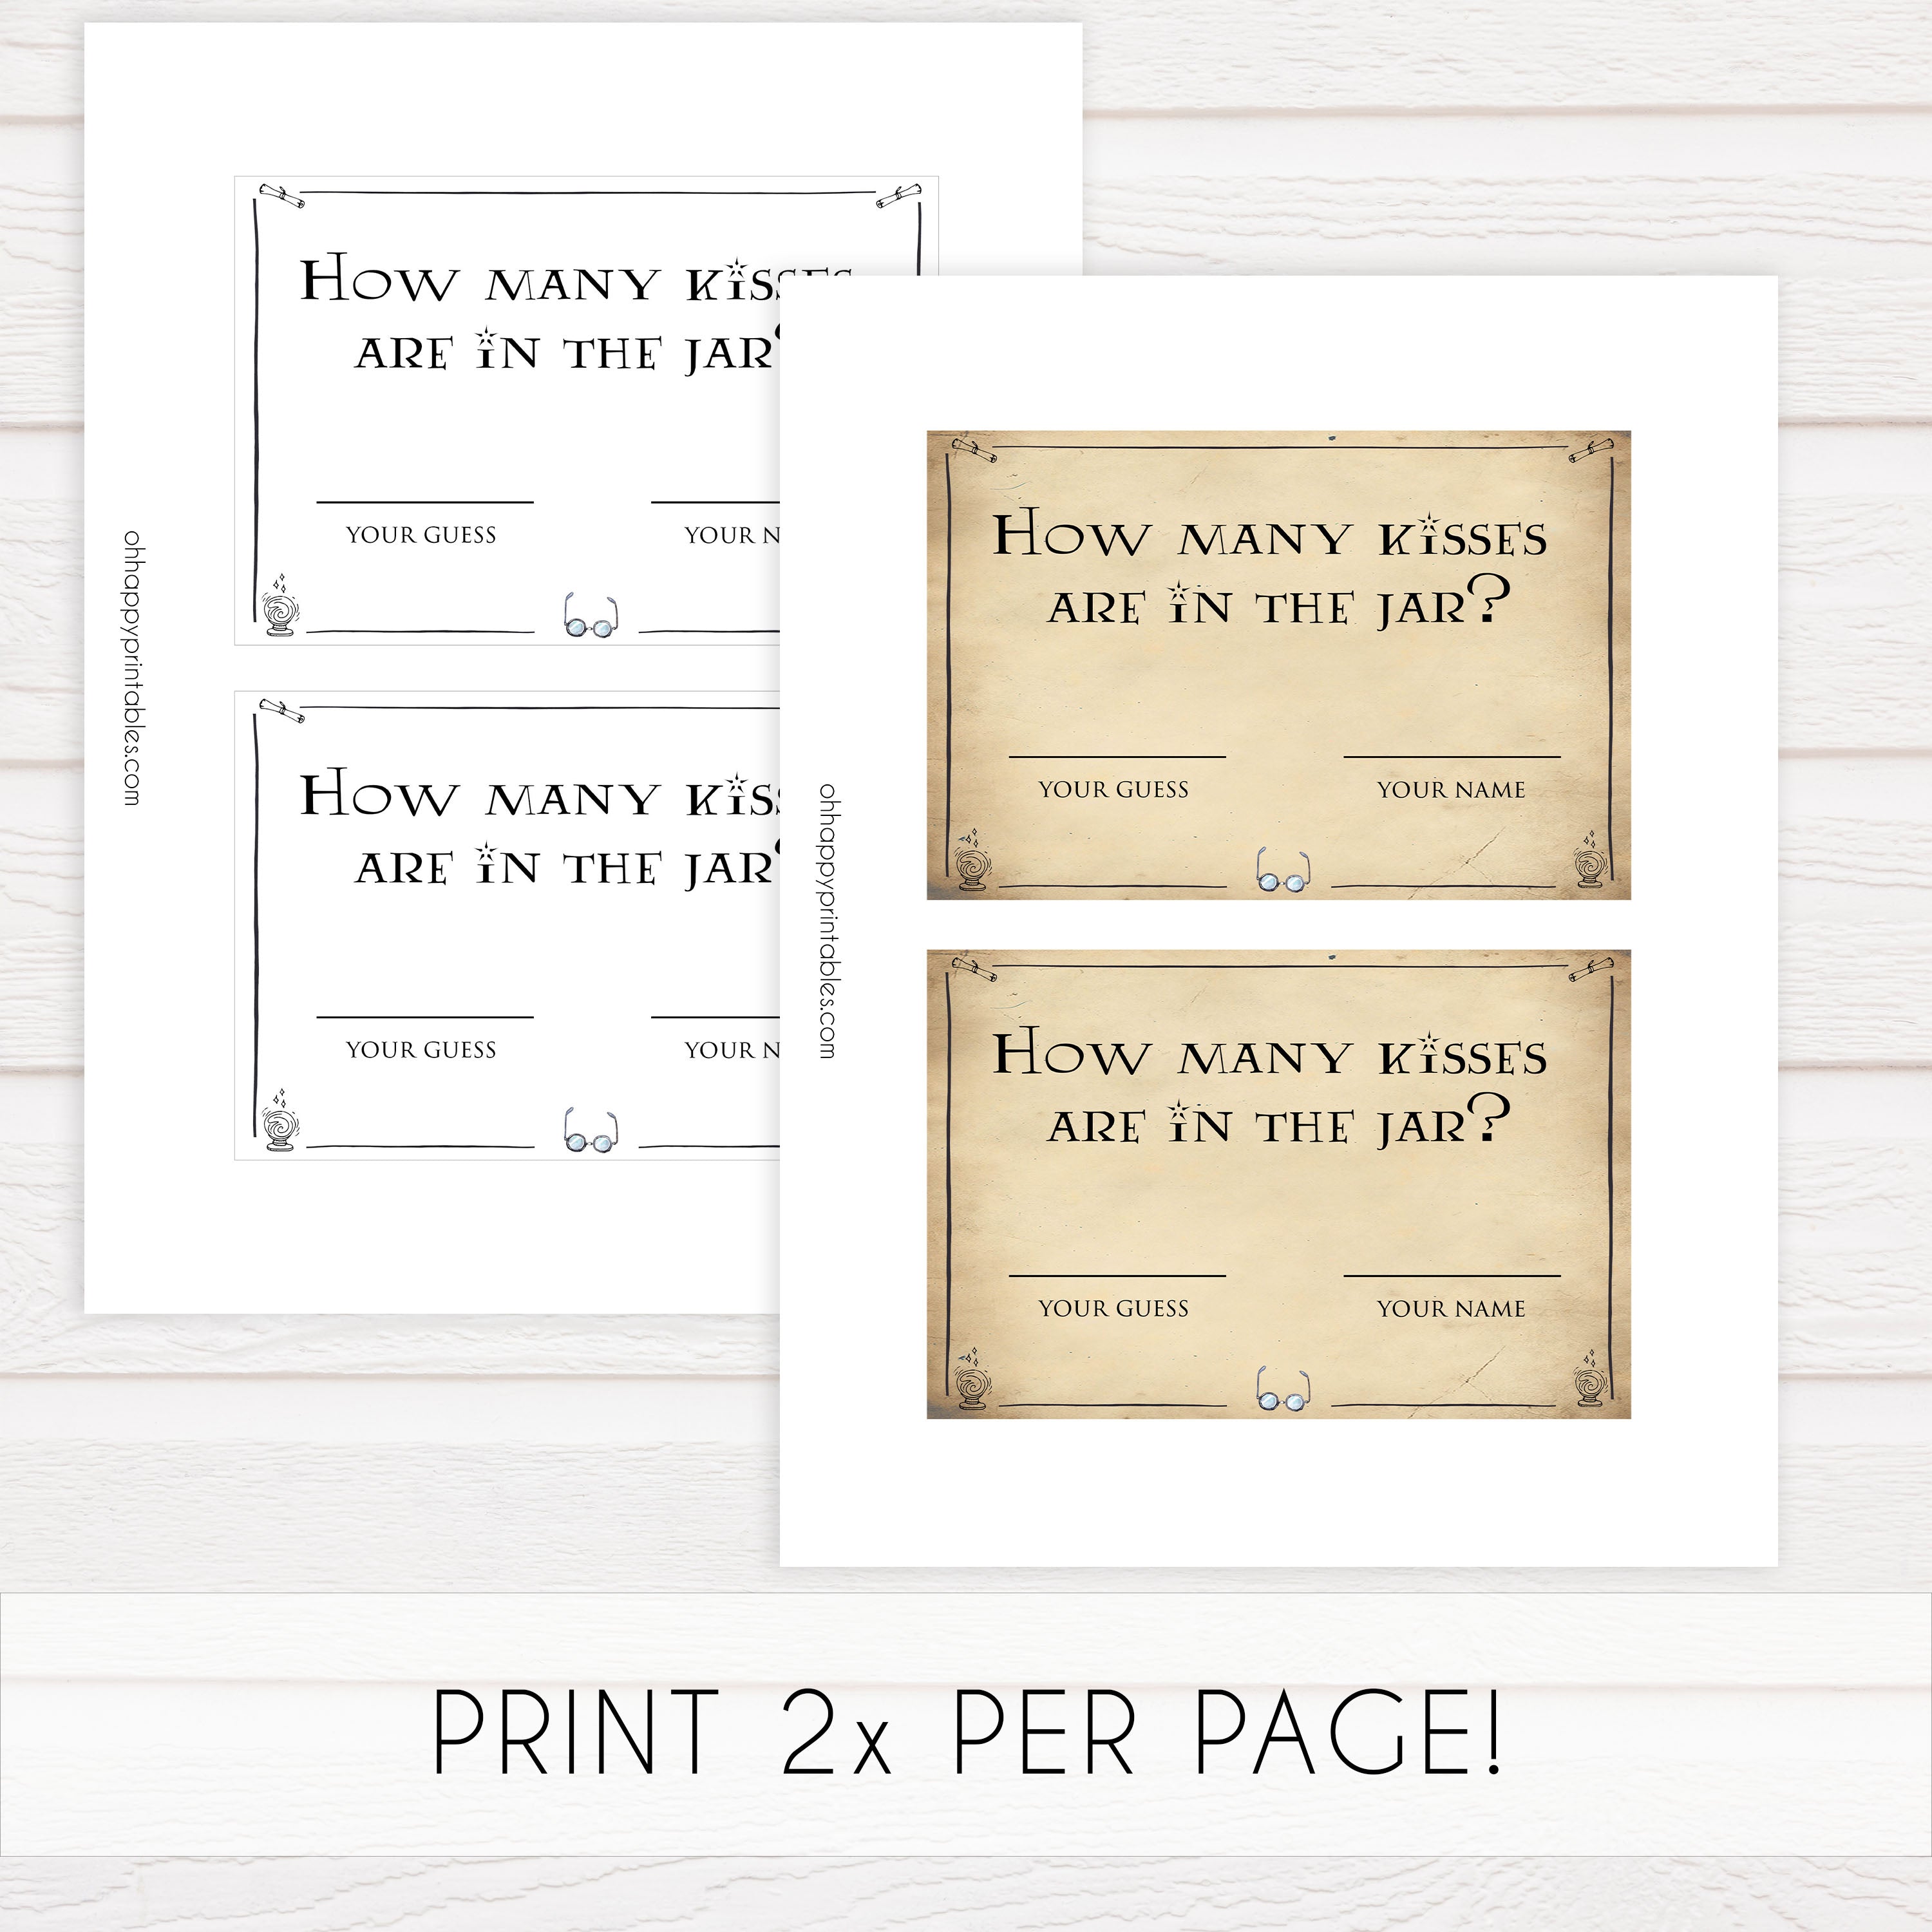 guess how many kisses game, bridal guess the kisses game, Printable bridal shower games, Harry potter bridal shower, Harry Potter bridal shower games, fun bridal shower games, bridal shower game ideas, Harry Potter bridal shower